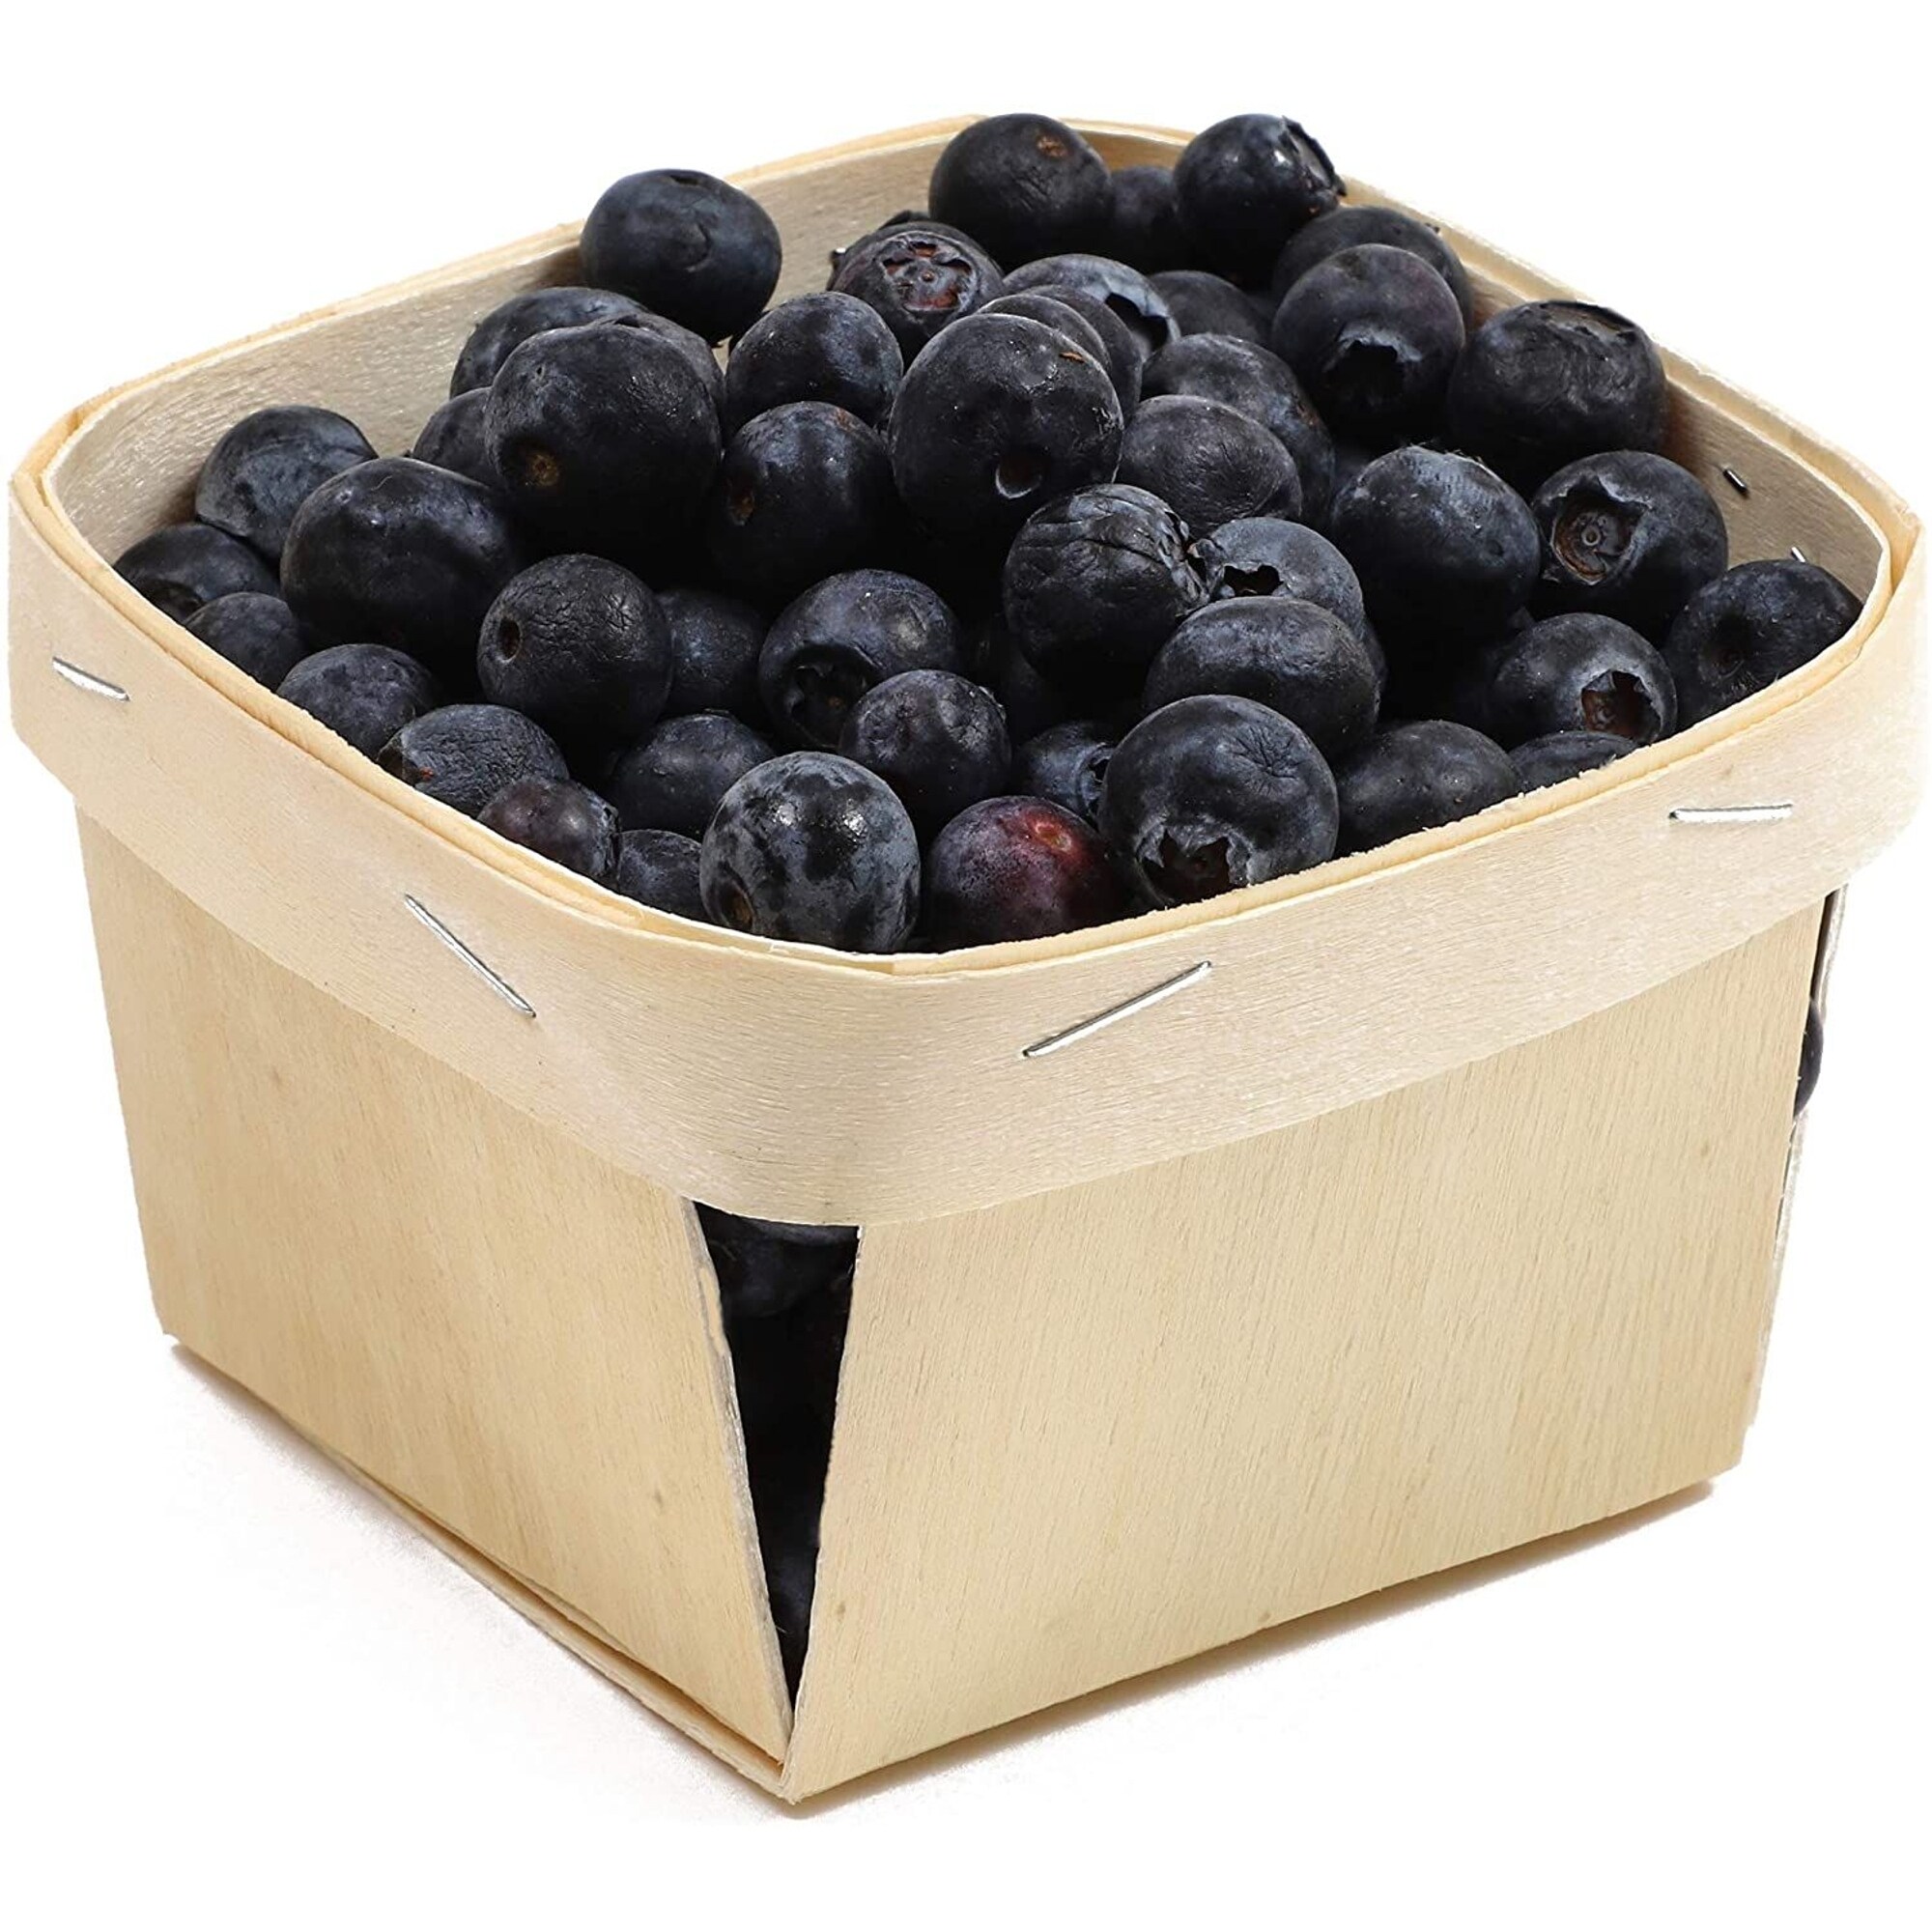 One Pint Wooden Berry Baskets (4 Inches, 10-Pack)